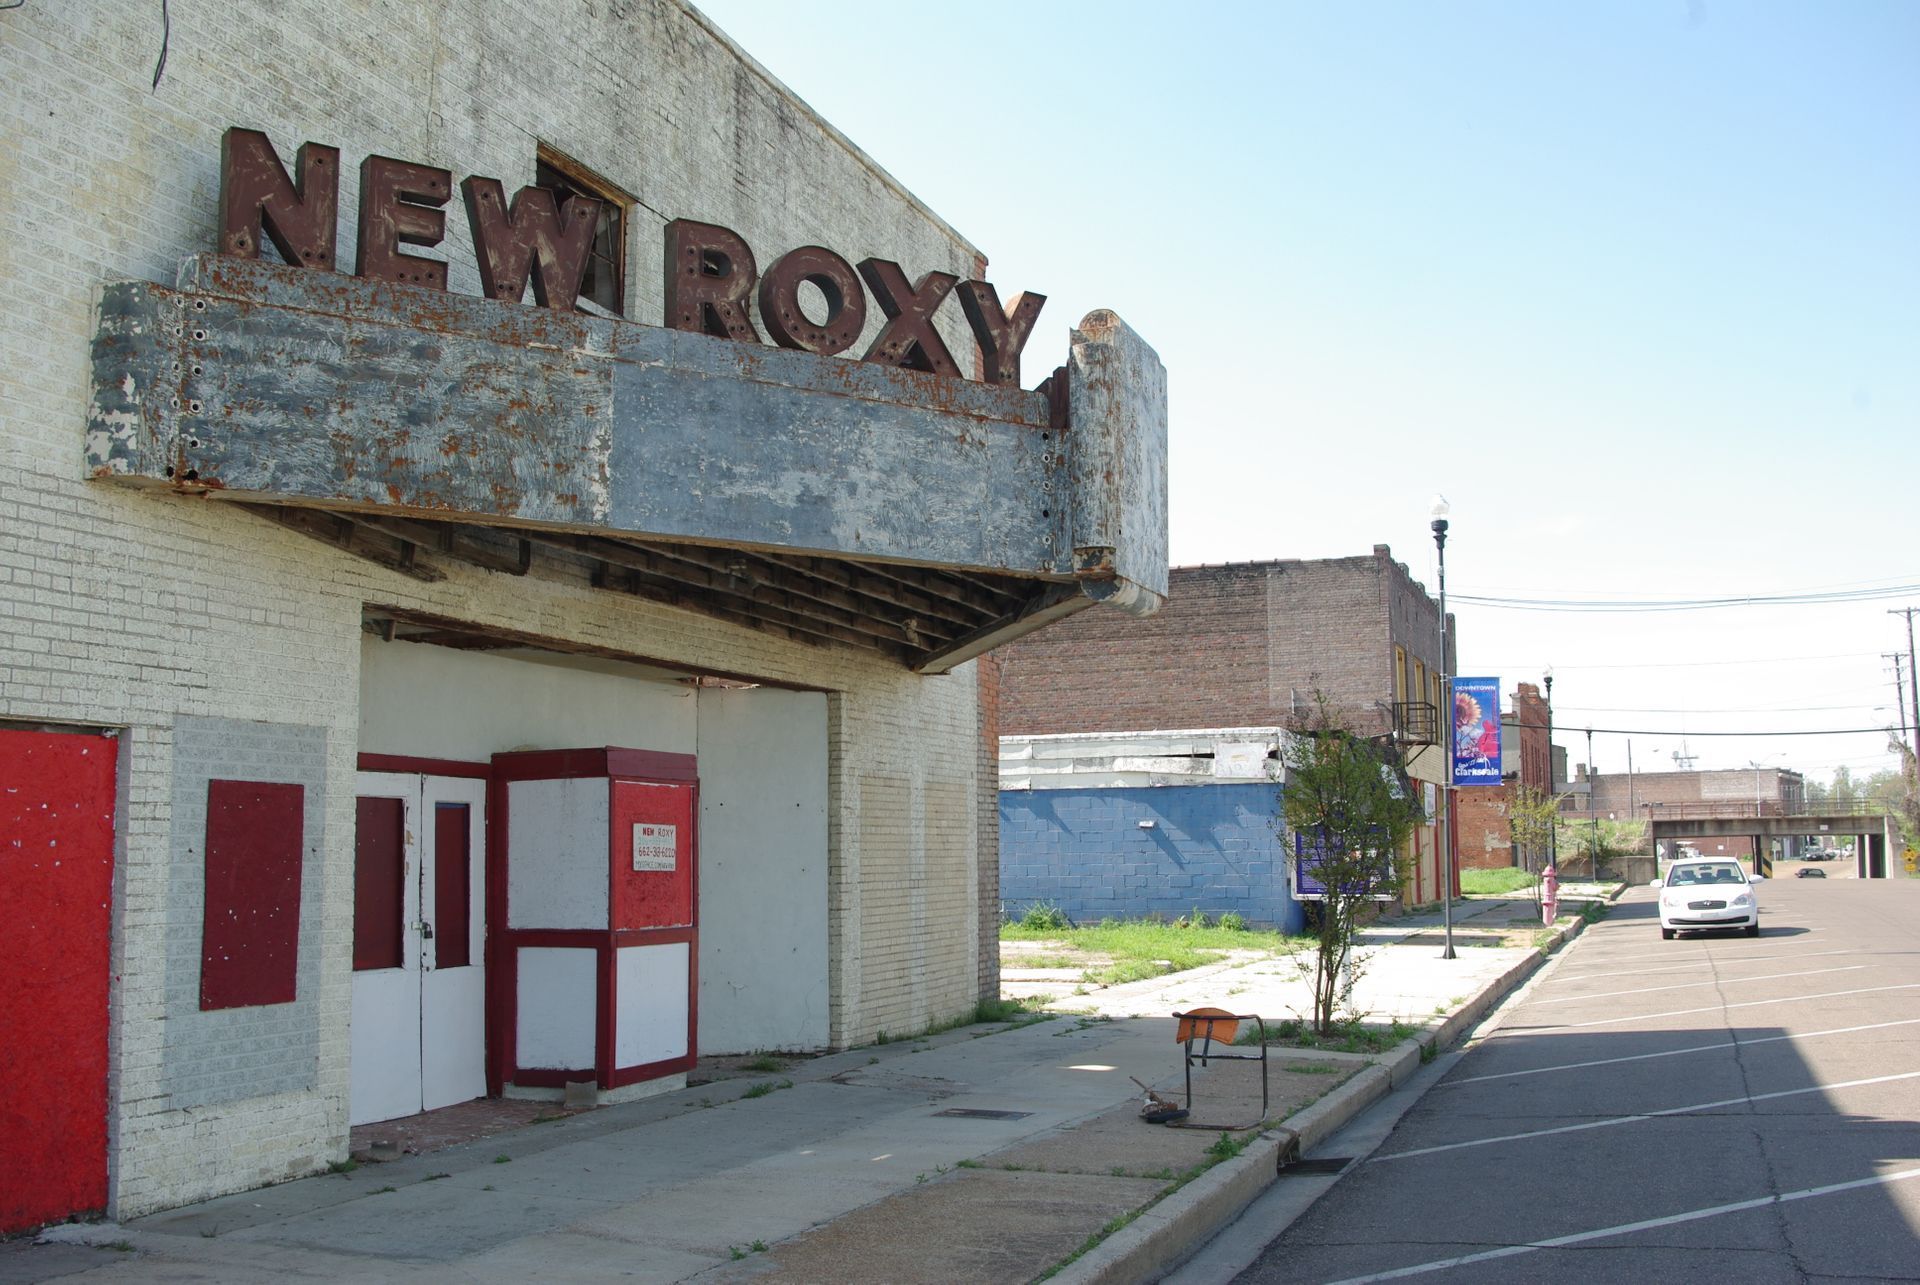 New Roxy in Clarksdale, Mississippi